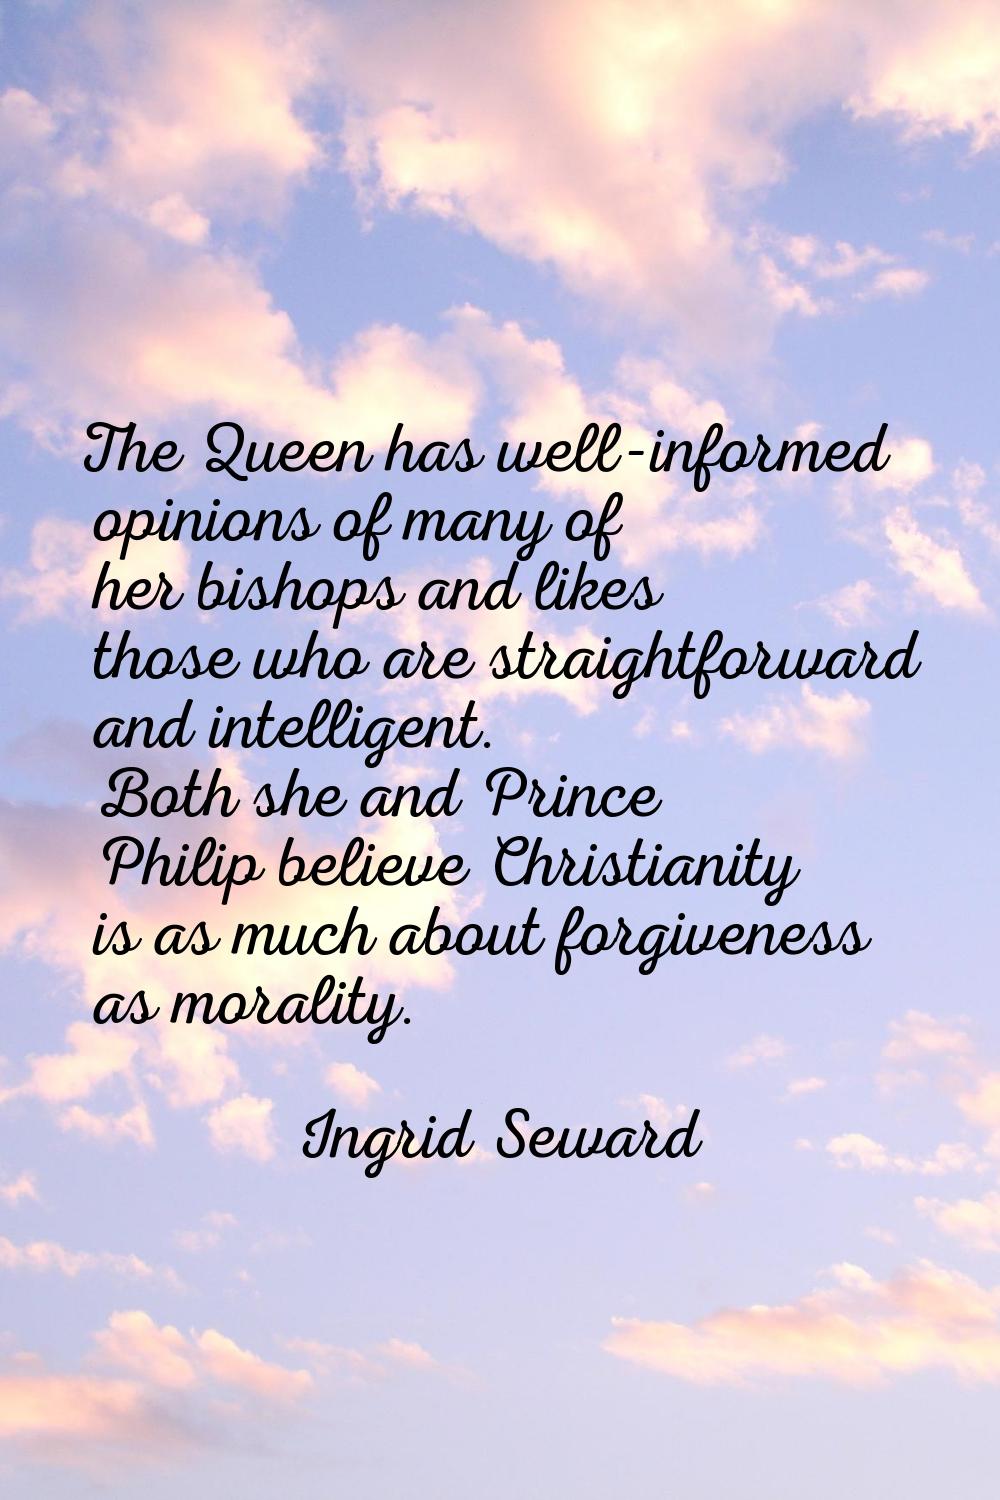 The Queen has well-informed opinions of many of her bishops and likes those who are straightforward